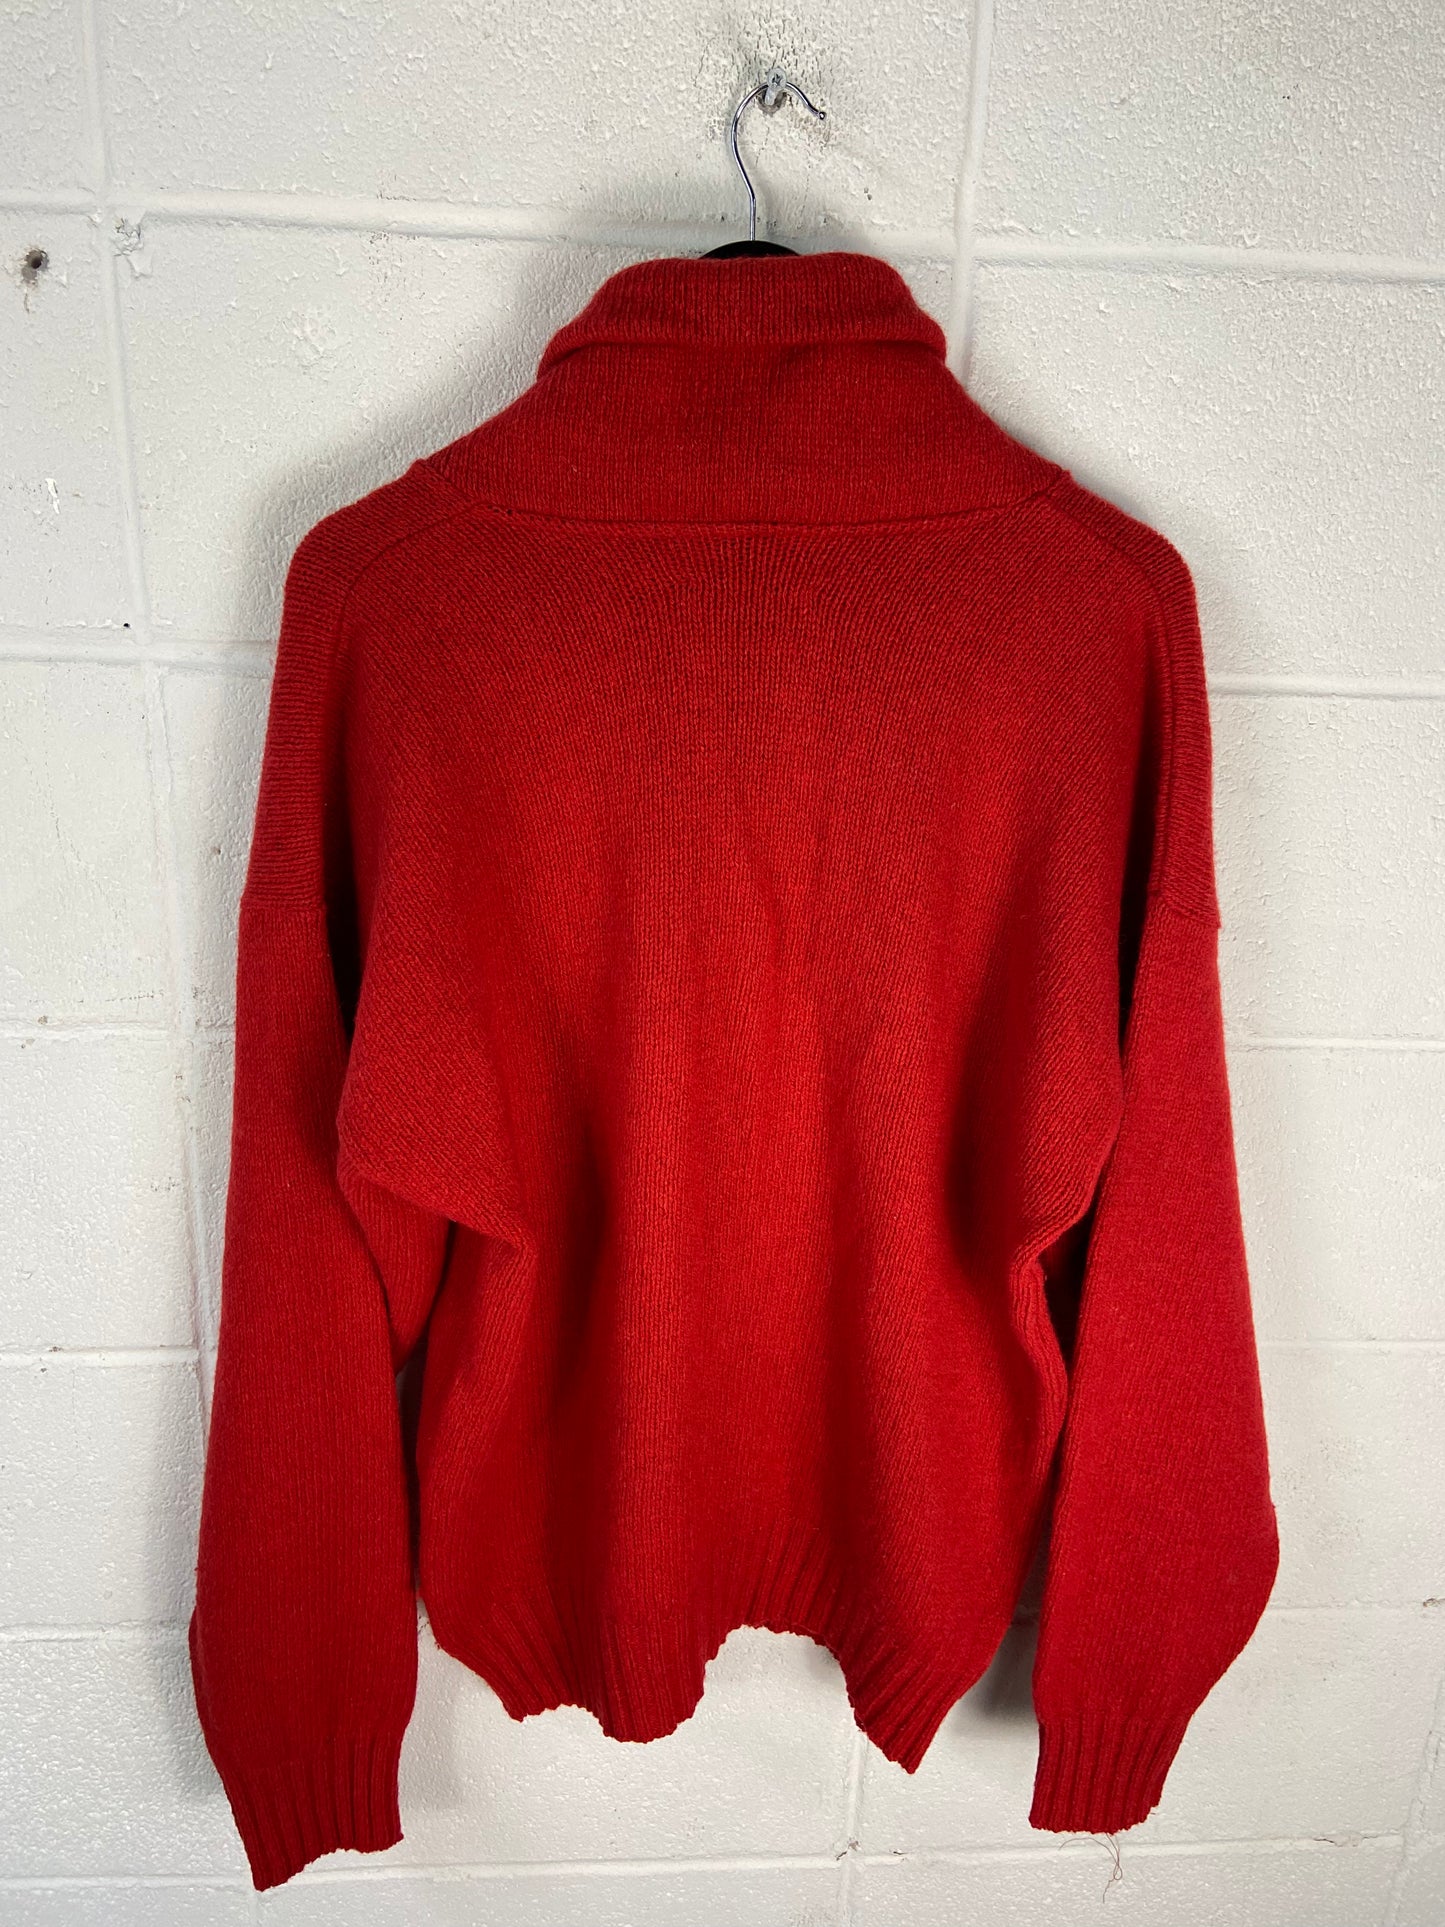 Load image into Gallery viewer, VTG London Fog Unlimited Red Cardigan Sz XL
